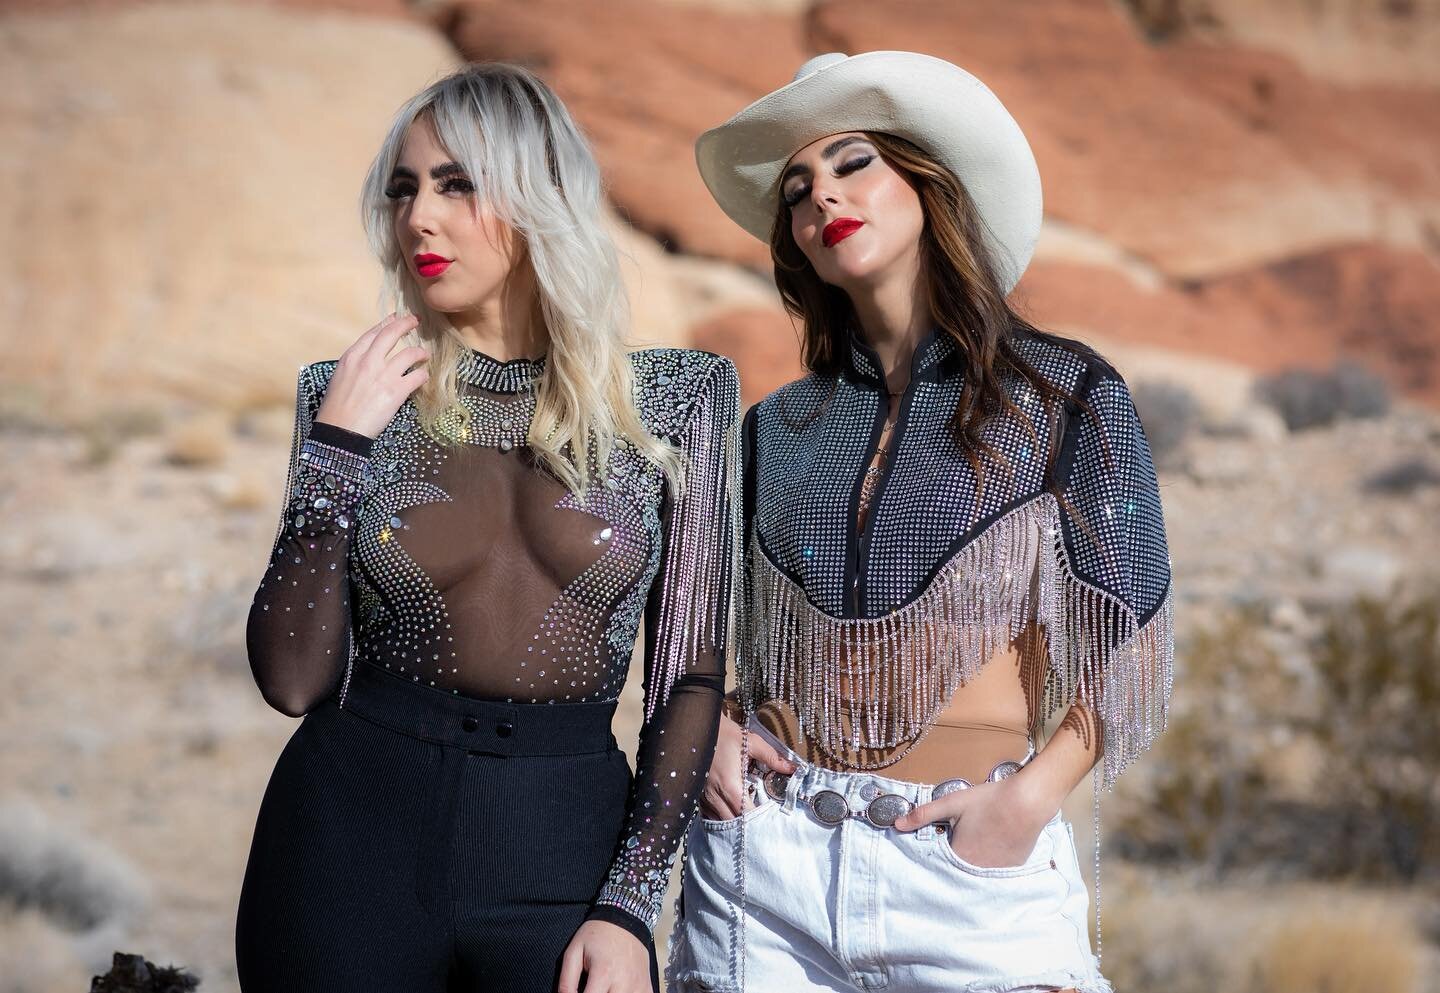 Happy International Women&rsquo;s Day to all you beautiful and strong ladies out there! Keep shining bright and being who you are ✨😚
.
.
.
.
.
.
.
.
.
.
.
.
.
.
.
.
#photoshoot#happy#international#womensday#duo#models#desert#shine#bright#strong#beau